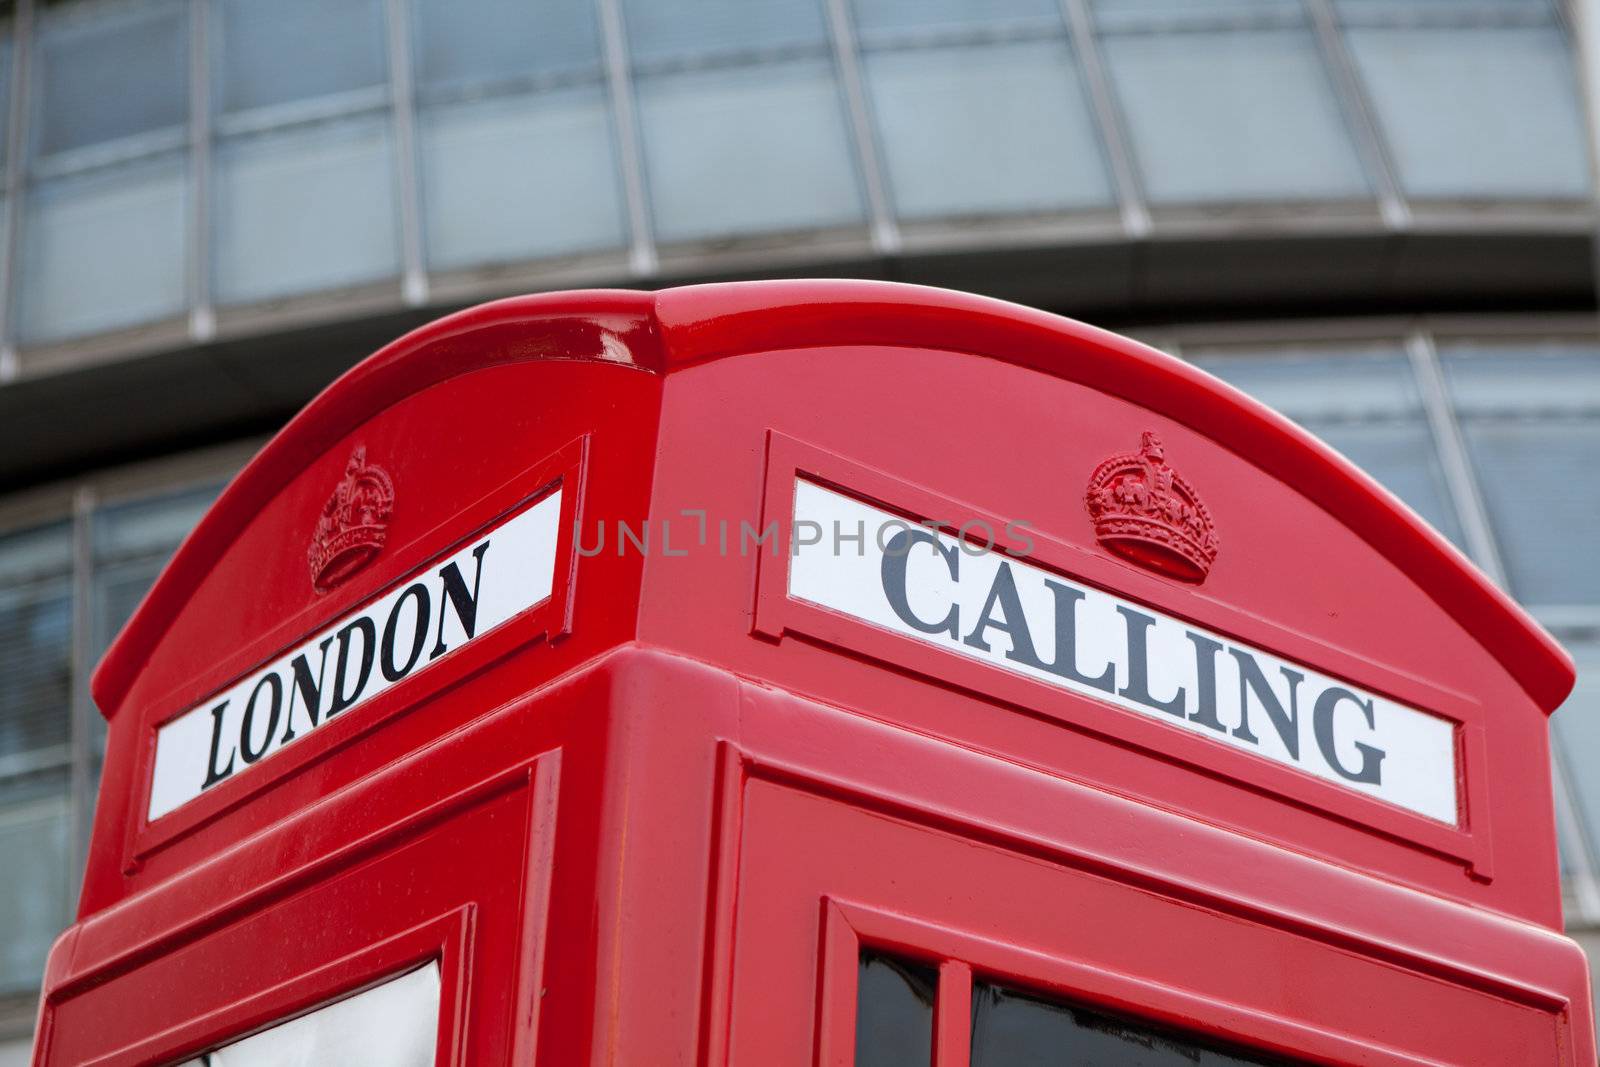 Traditional London symbol red public phone box for calling on the modern business center façade background